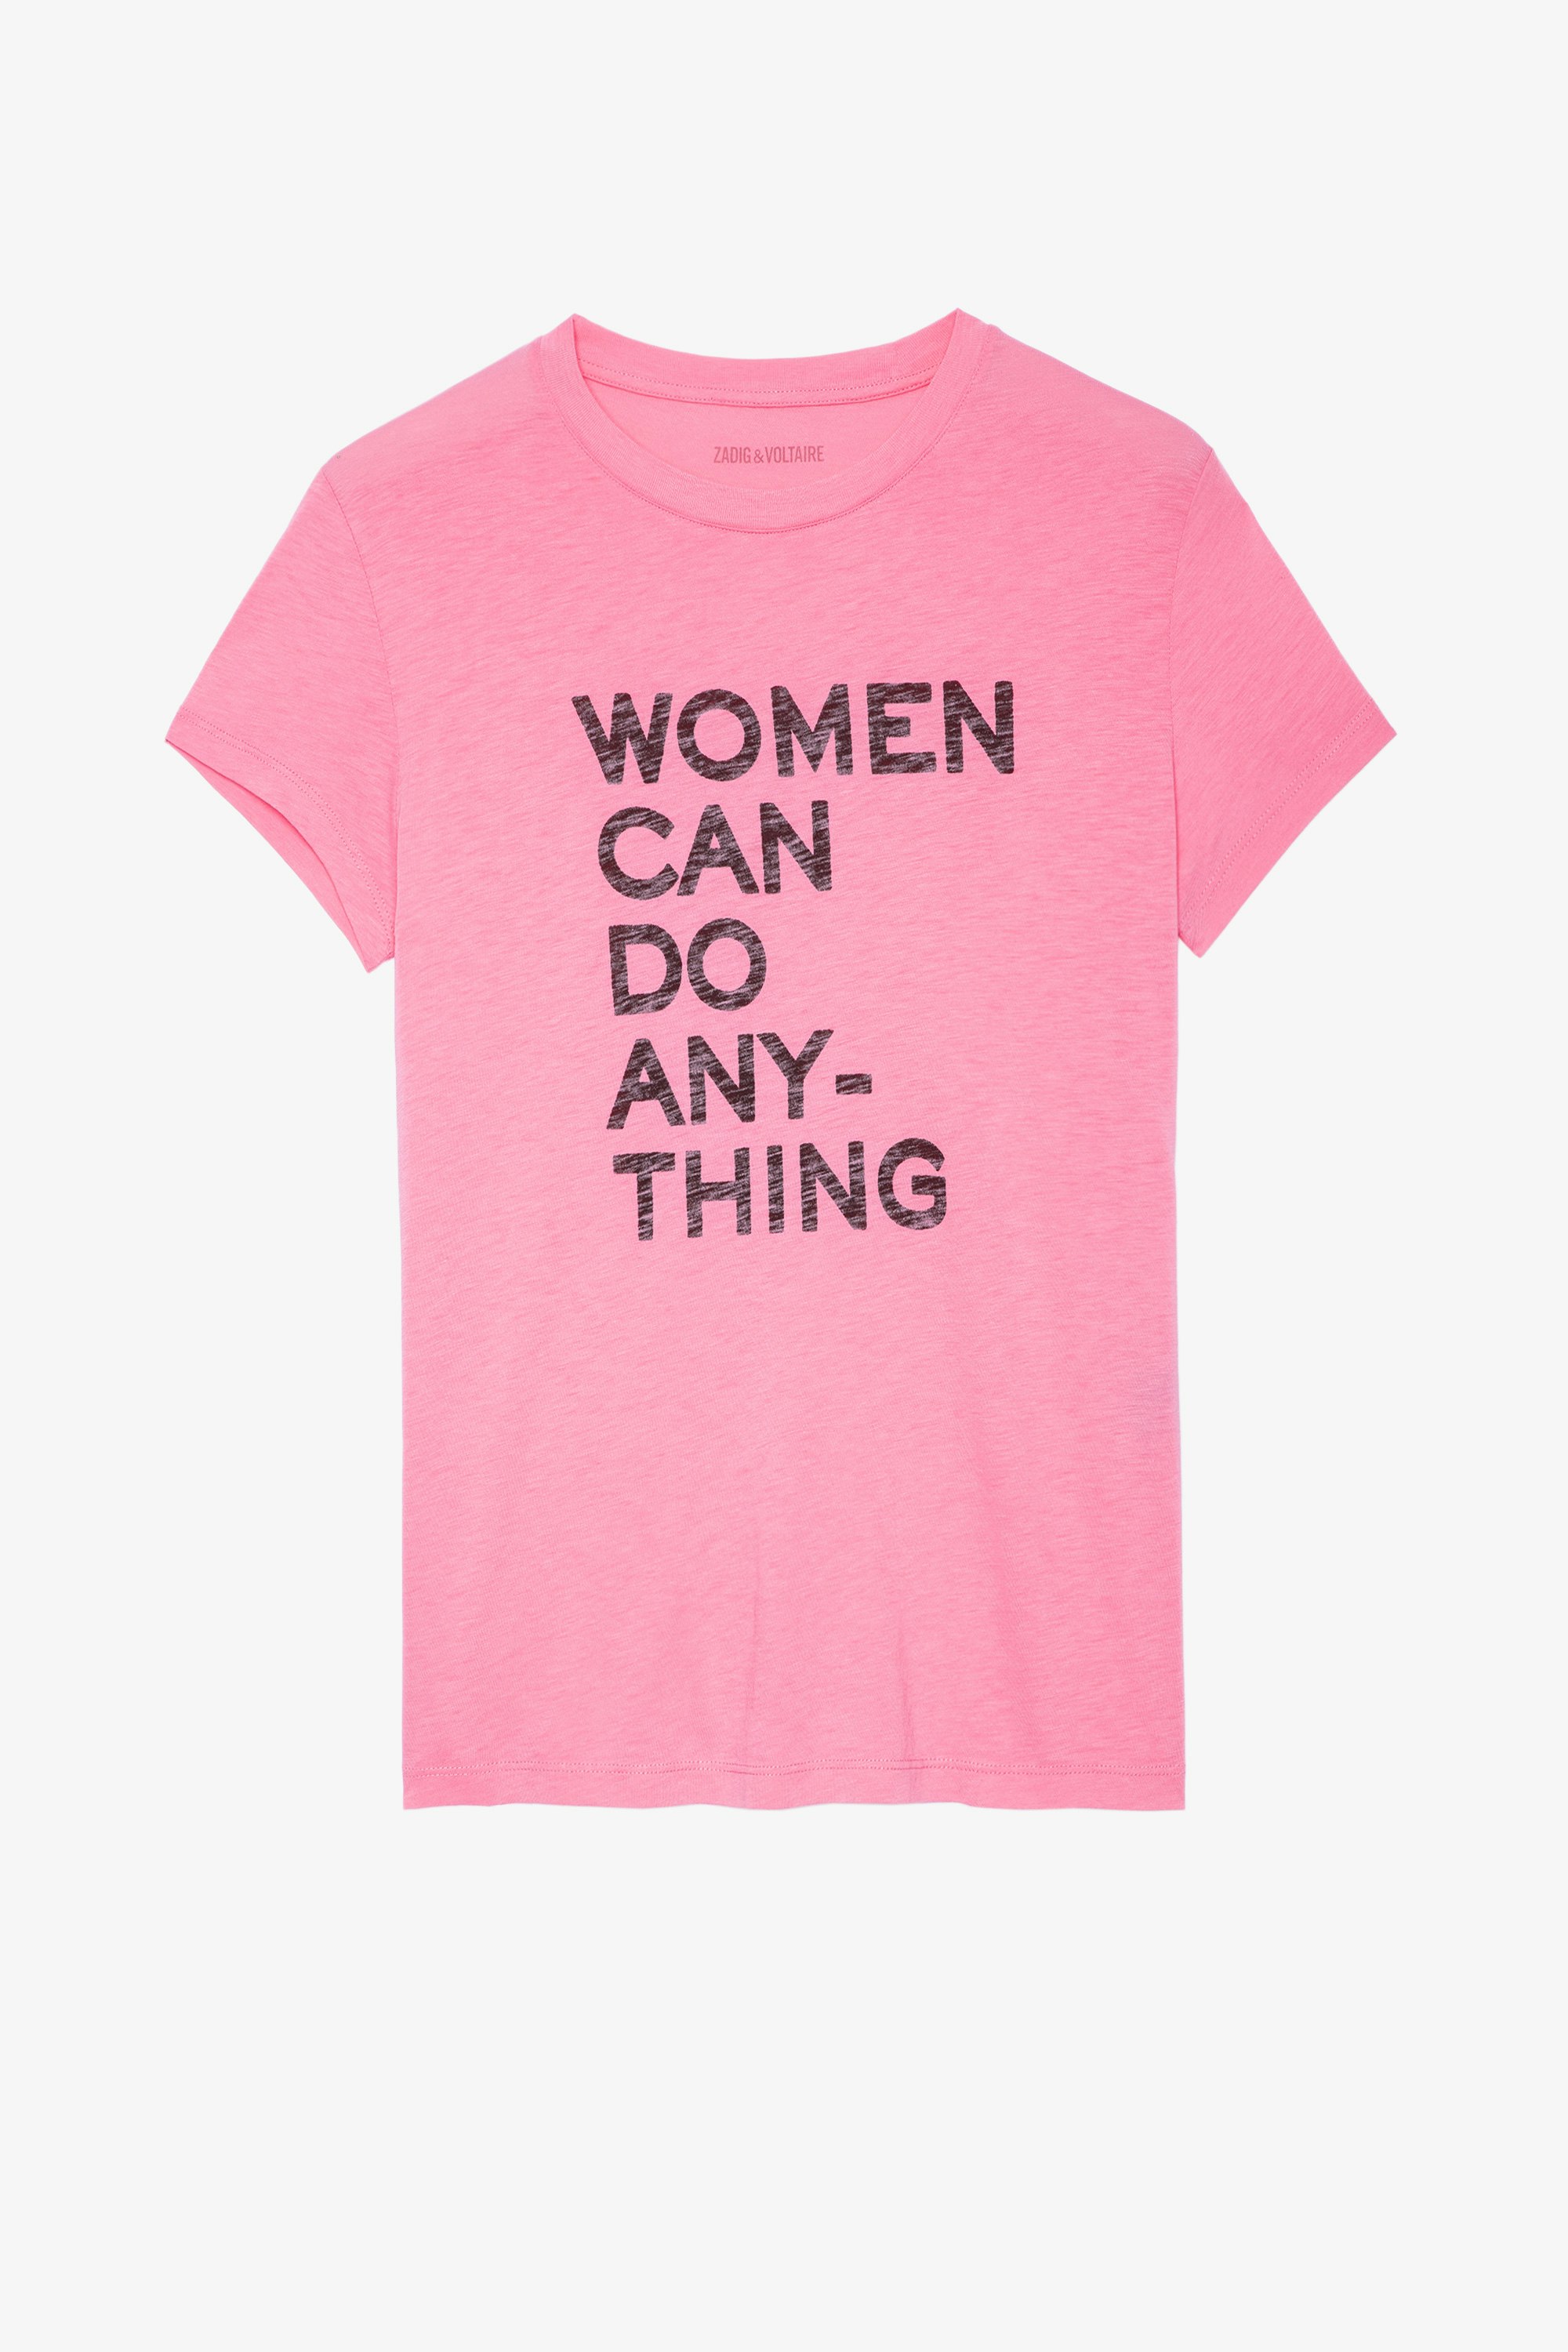 Walk Women can do anything Ｔシャツ Women's pink cotton t-shirt with 'Women can do anything' slogan